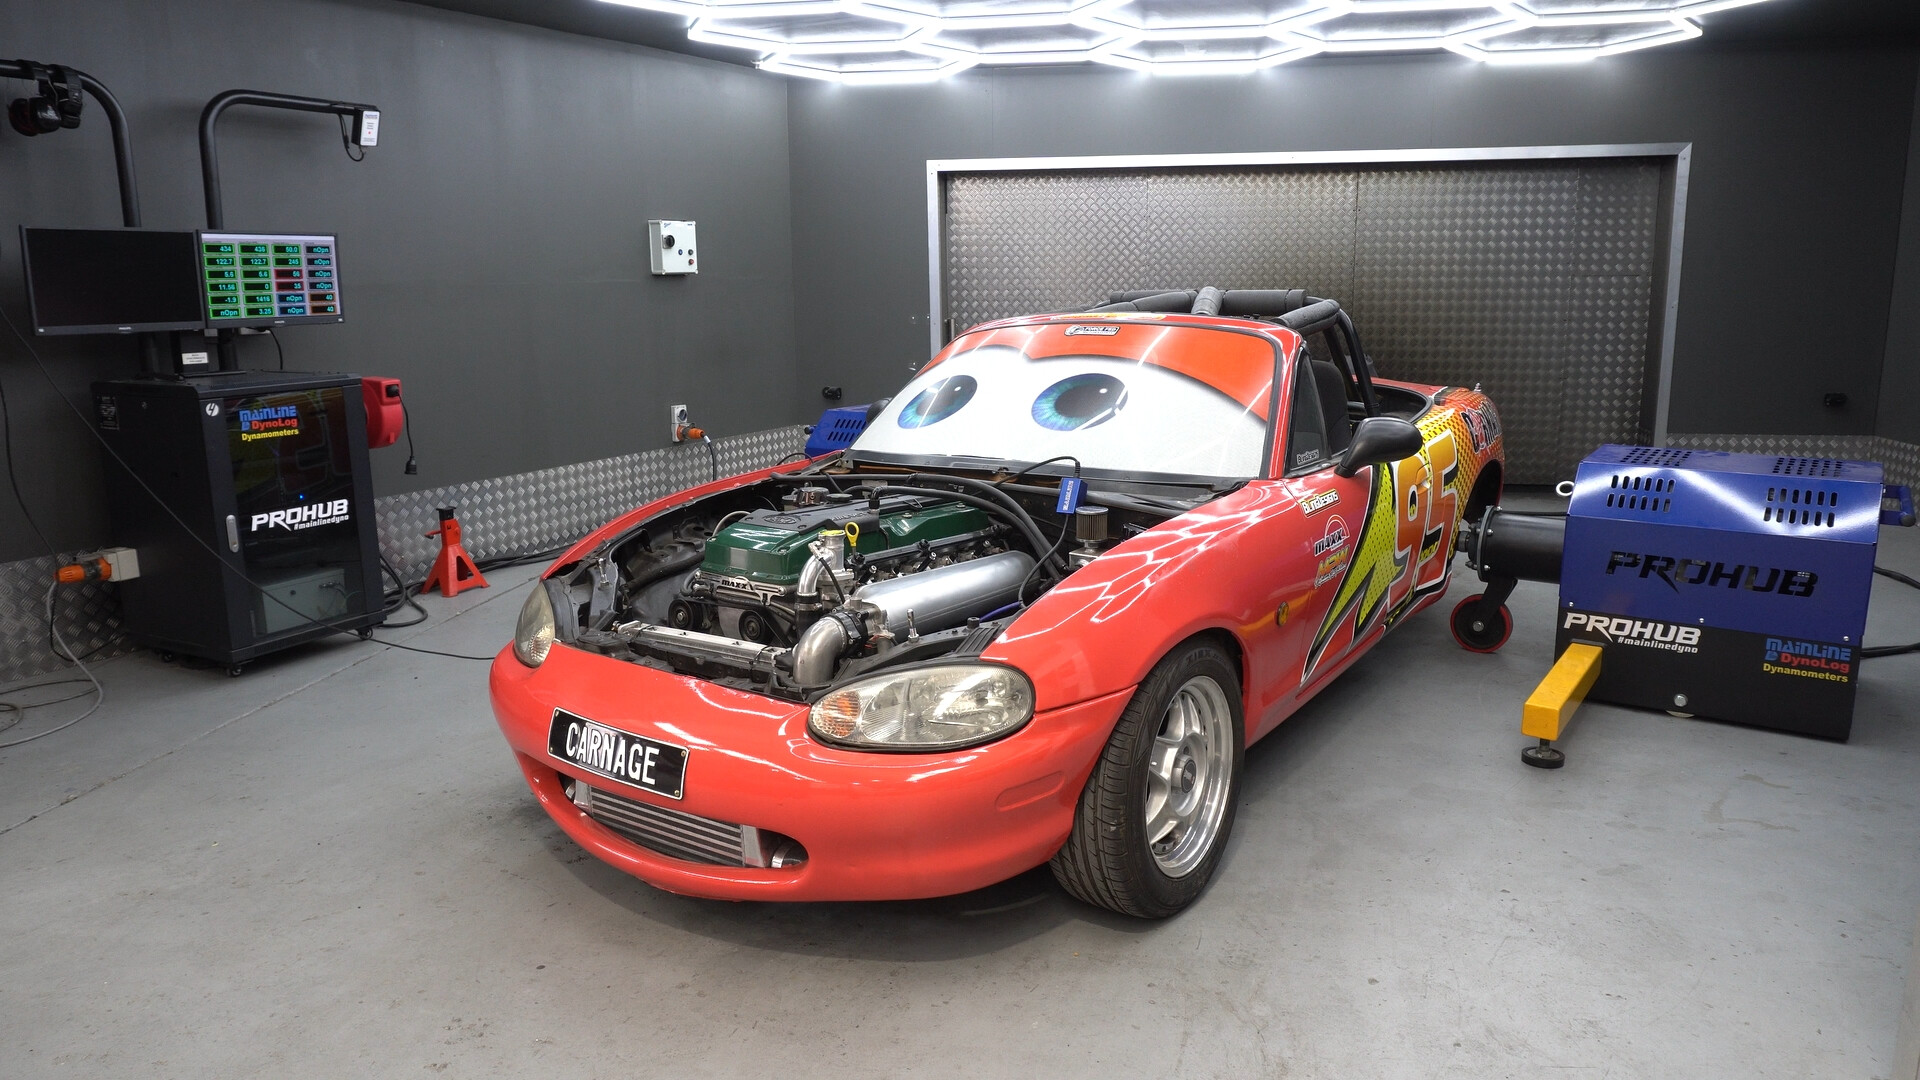 Video: The MX-5 hits the dyno with a new turbo!